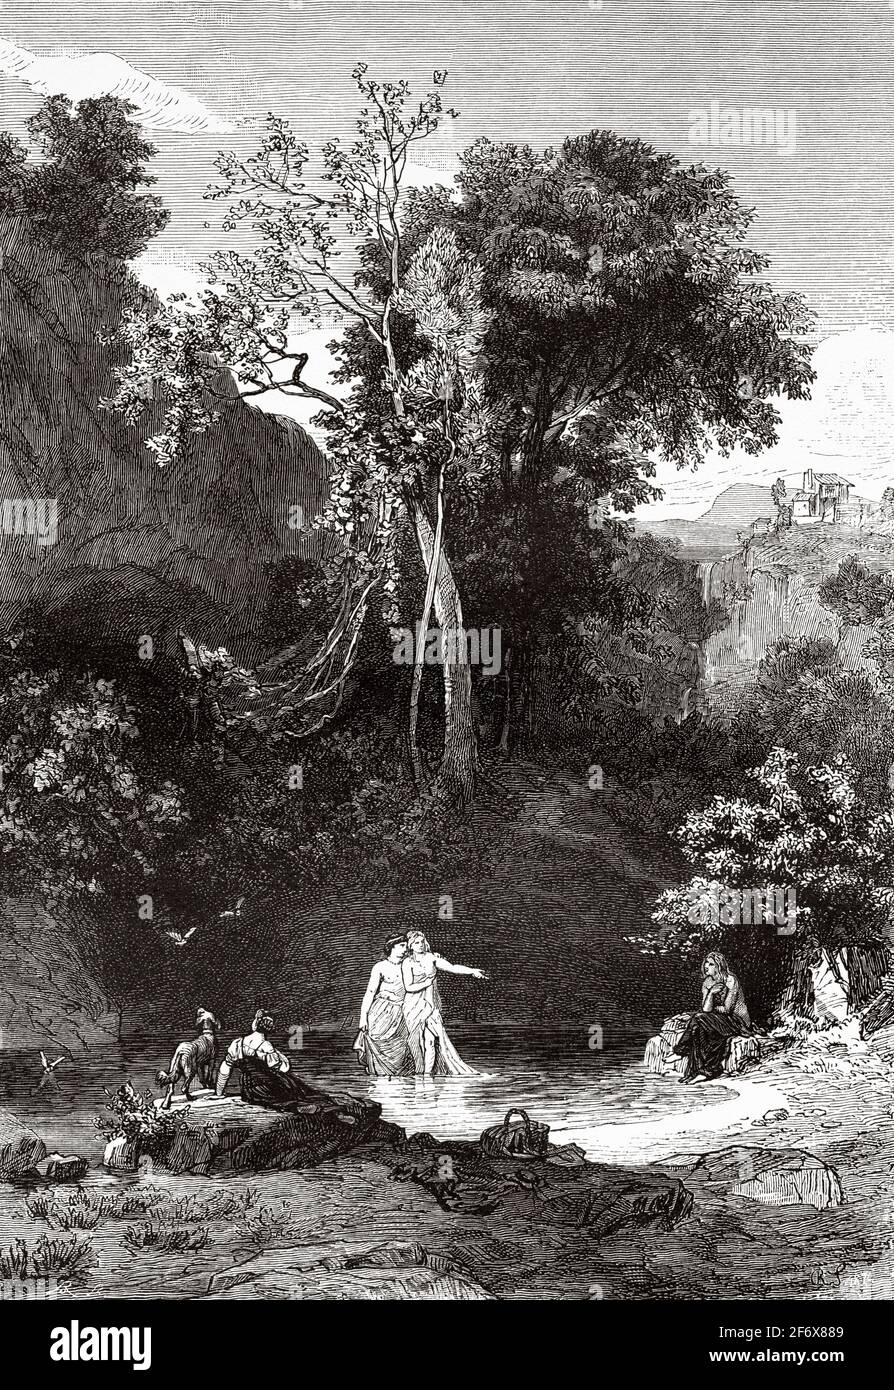 Lago di Levico. Young people bathing in the waters of the Levico Lake in Valsugana, Levico Terme, Trentino Alto Adige, Italy, Europe. Old 19th century engraved illustration from El Mundo Ilustrado 1879 Stock Photo